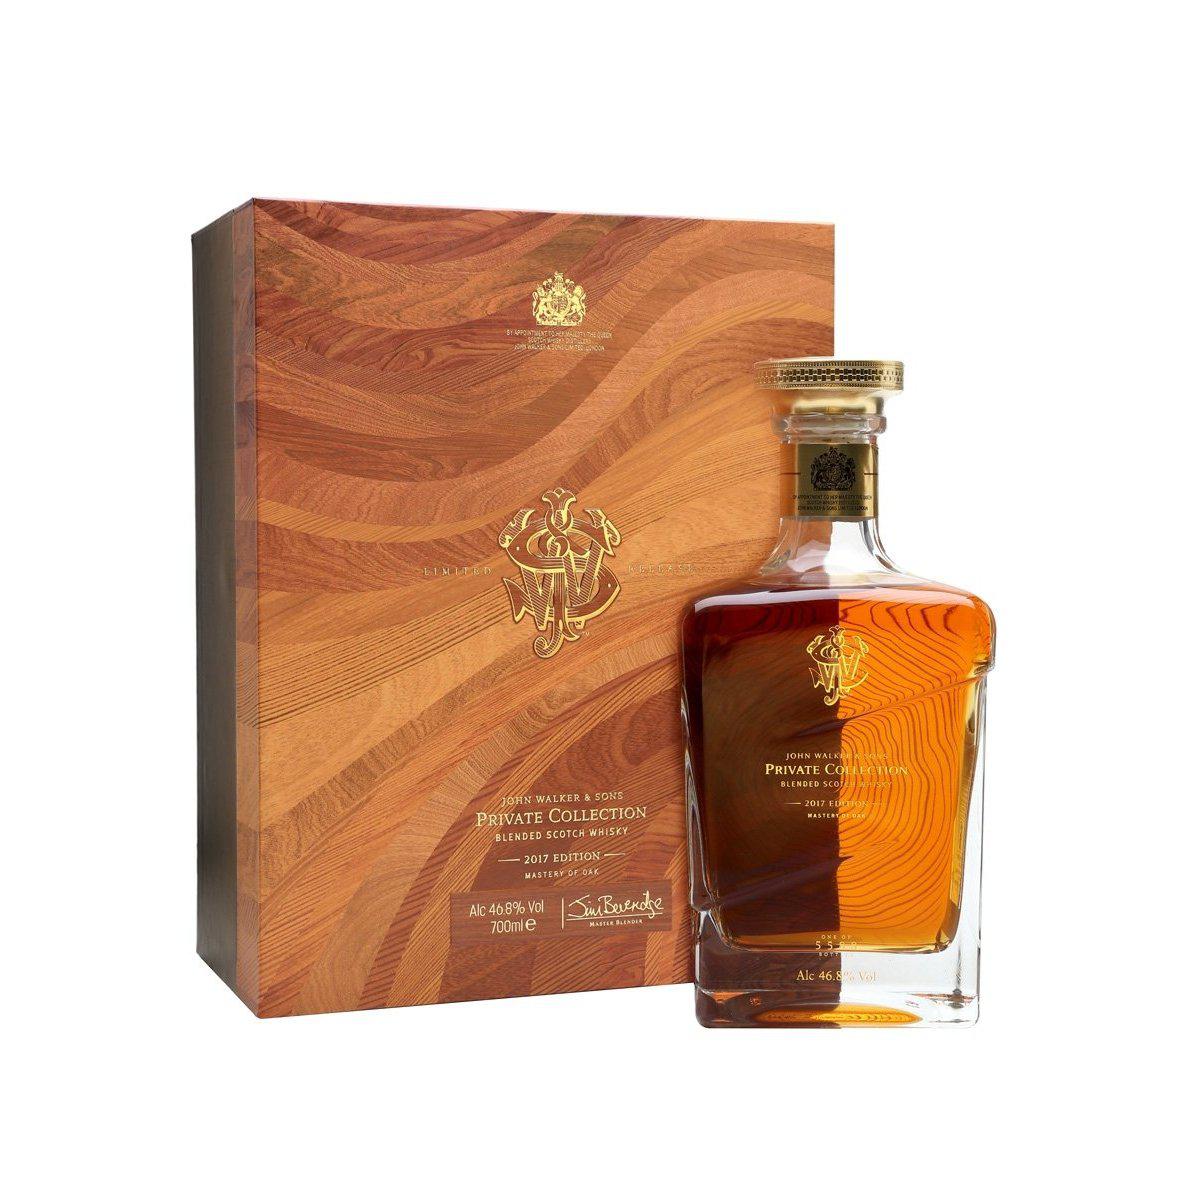 John Walker & Sons Private Collection 2017 Limited Edition 700ml